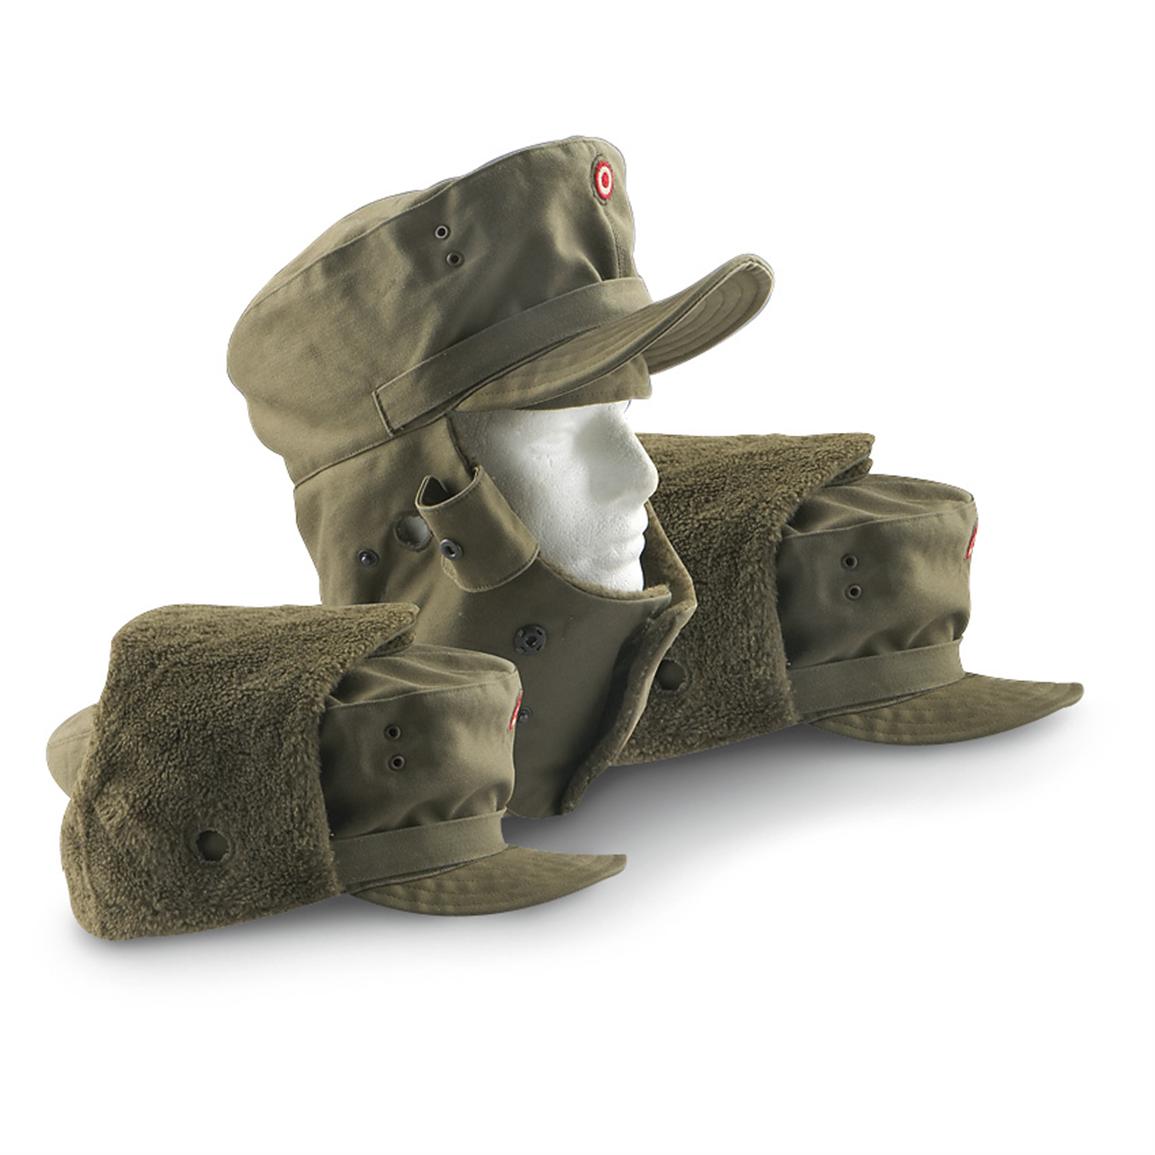 3 Pk Used Austrian Winter Caps Olive Drab 140435 Hats And Caps At